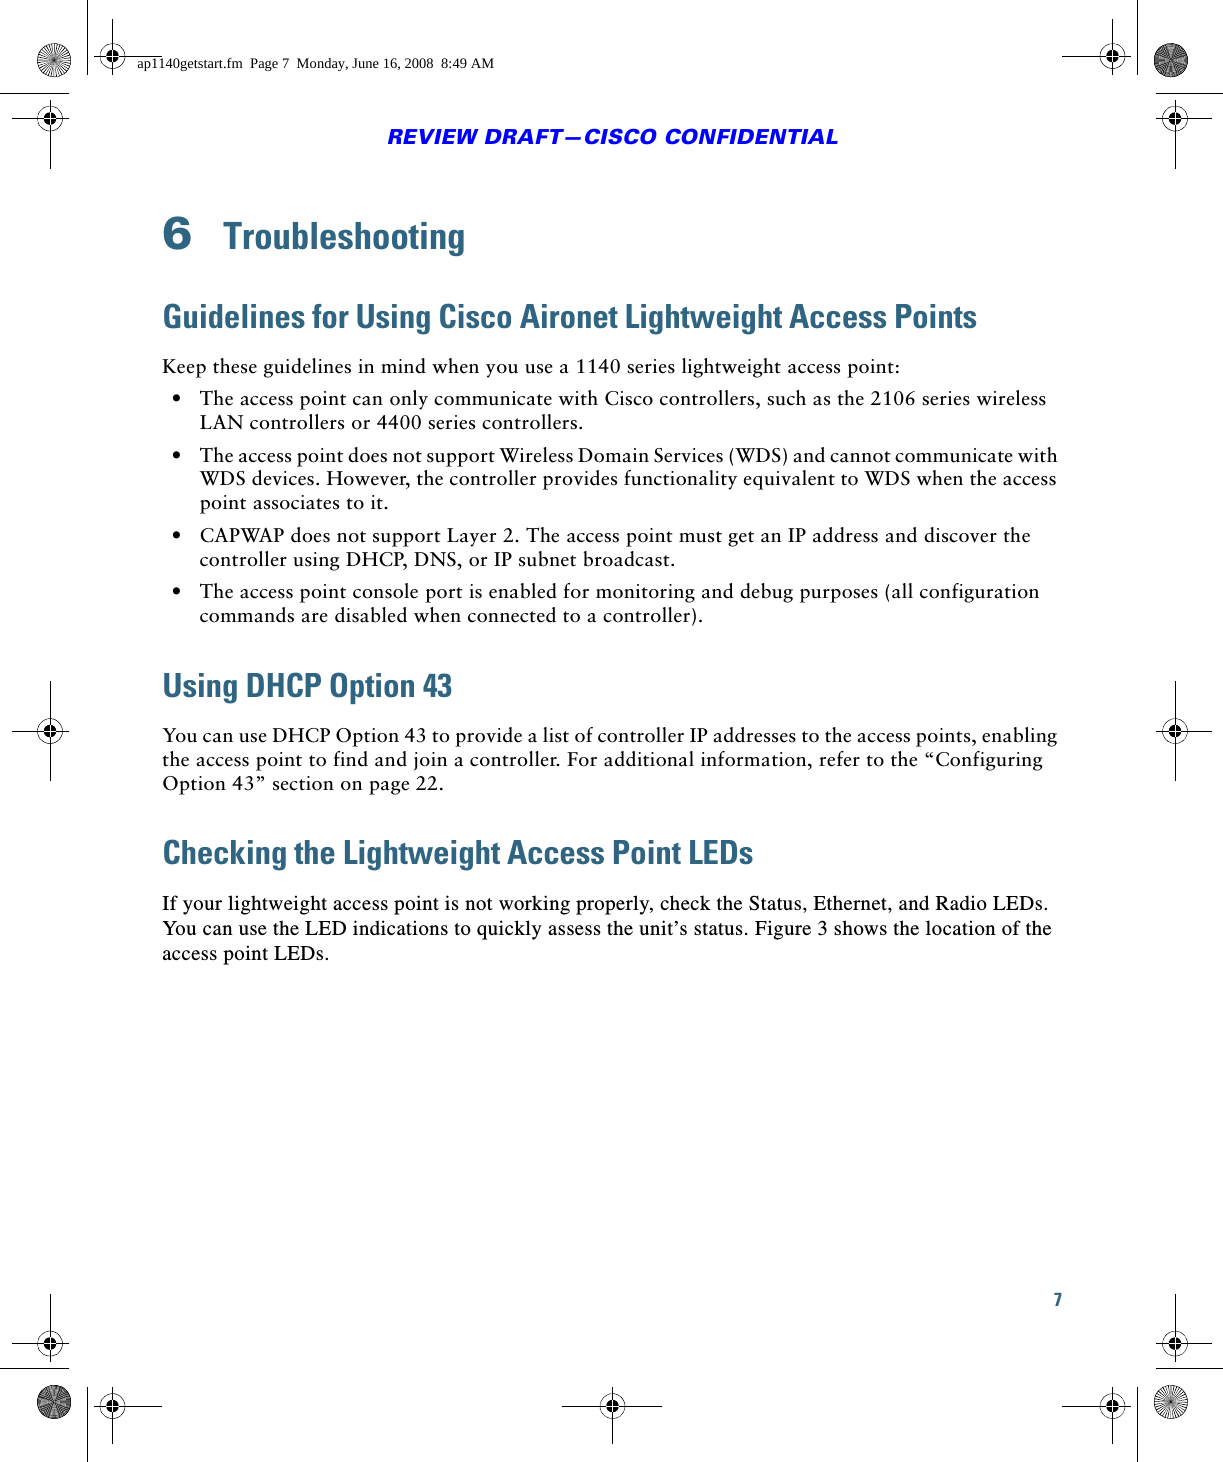 7REVIEW DRAFT—CISCO CONFIDENTIAL6  TroubleshootingGuidelines for Using Cisco Aironet Lightweight Access PointsKeep these guidelines in mind when you use a 1140 series lightweight access point:  • The access point can only communicate with Cisco controllers, such as the 2106 series wireless LAN controllers or 4400 series controllers.  • The access point does not support Wireless Domain Services (WDS) and cannot communicate with WDS devices. However, the controller provides functionality equivalent to WDS when the access point associates to it.  • CAPWAP does not support Layer 2. The access point must get an IP address and discover the controller using DHCP, DNS, or IP subnet broadcast.  • The access point console port is enabled for monitoring and debug purposes (all configuration commands are disabled when connected to a controller). Using DHCP Option 43You can use DHCP Option 43 to provide a list of controller IP addresses to the access points, enabling the access point to find and join a controller. For additional information, refer to the “Configuring Option 43” section on page 22.Checking the Lightweight Access Point LEDsIf your lightweight access point is not working properly, check the Status, Ethernet, and Radio LEDs. You can use the LED indications to quickly assess the unit’s status. Figure 3 shows the location of the access point LEDs.ap1140getstart.fm  Page 7  Monday, June 16, 2008  8:49 AM